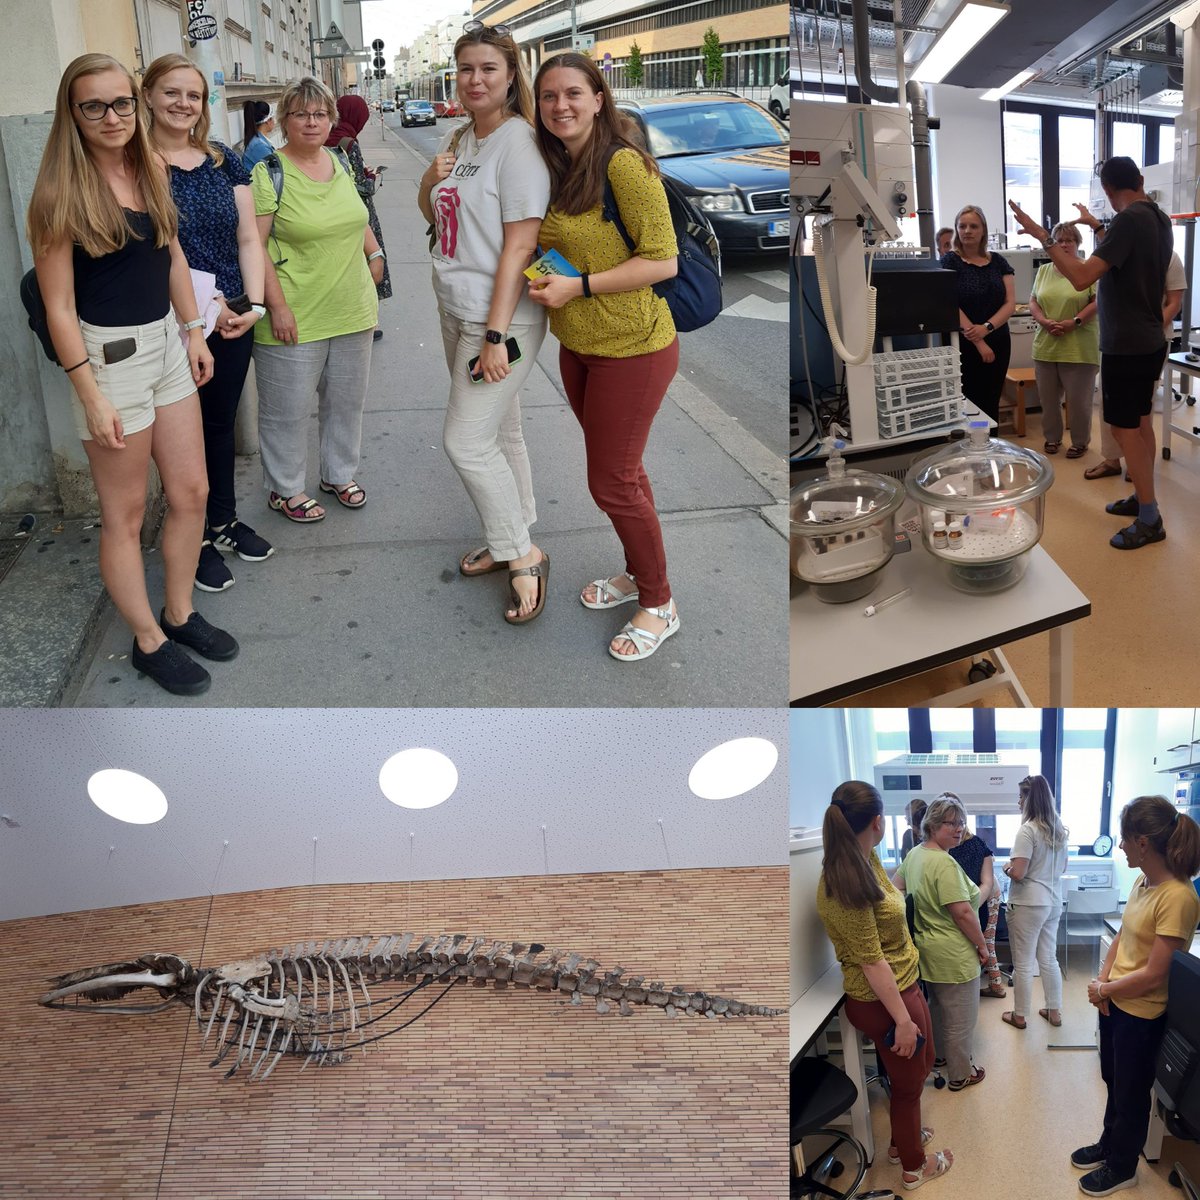 Thank you @Lauravdsluis and @tommyhigham for having us at @univienna yesterday! It was great to see your labs and facility! #14C #Vienna #Prague